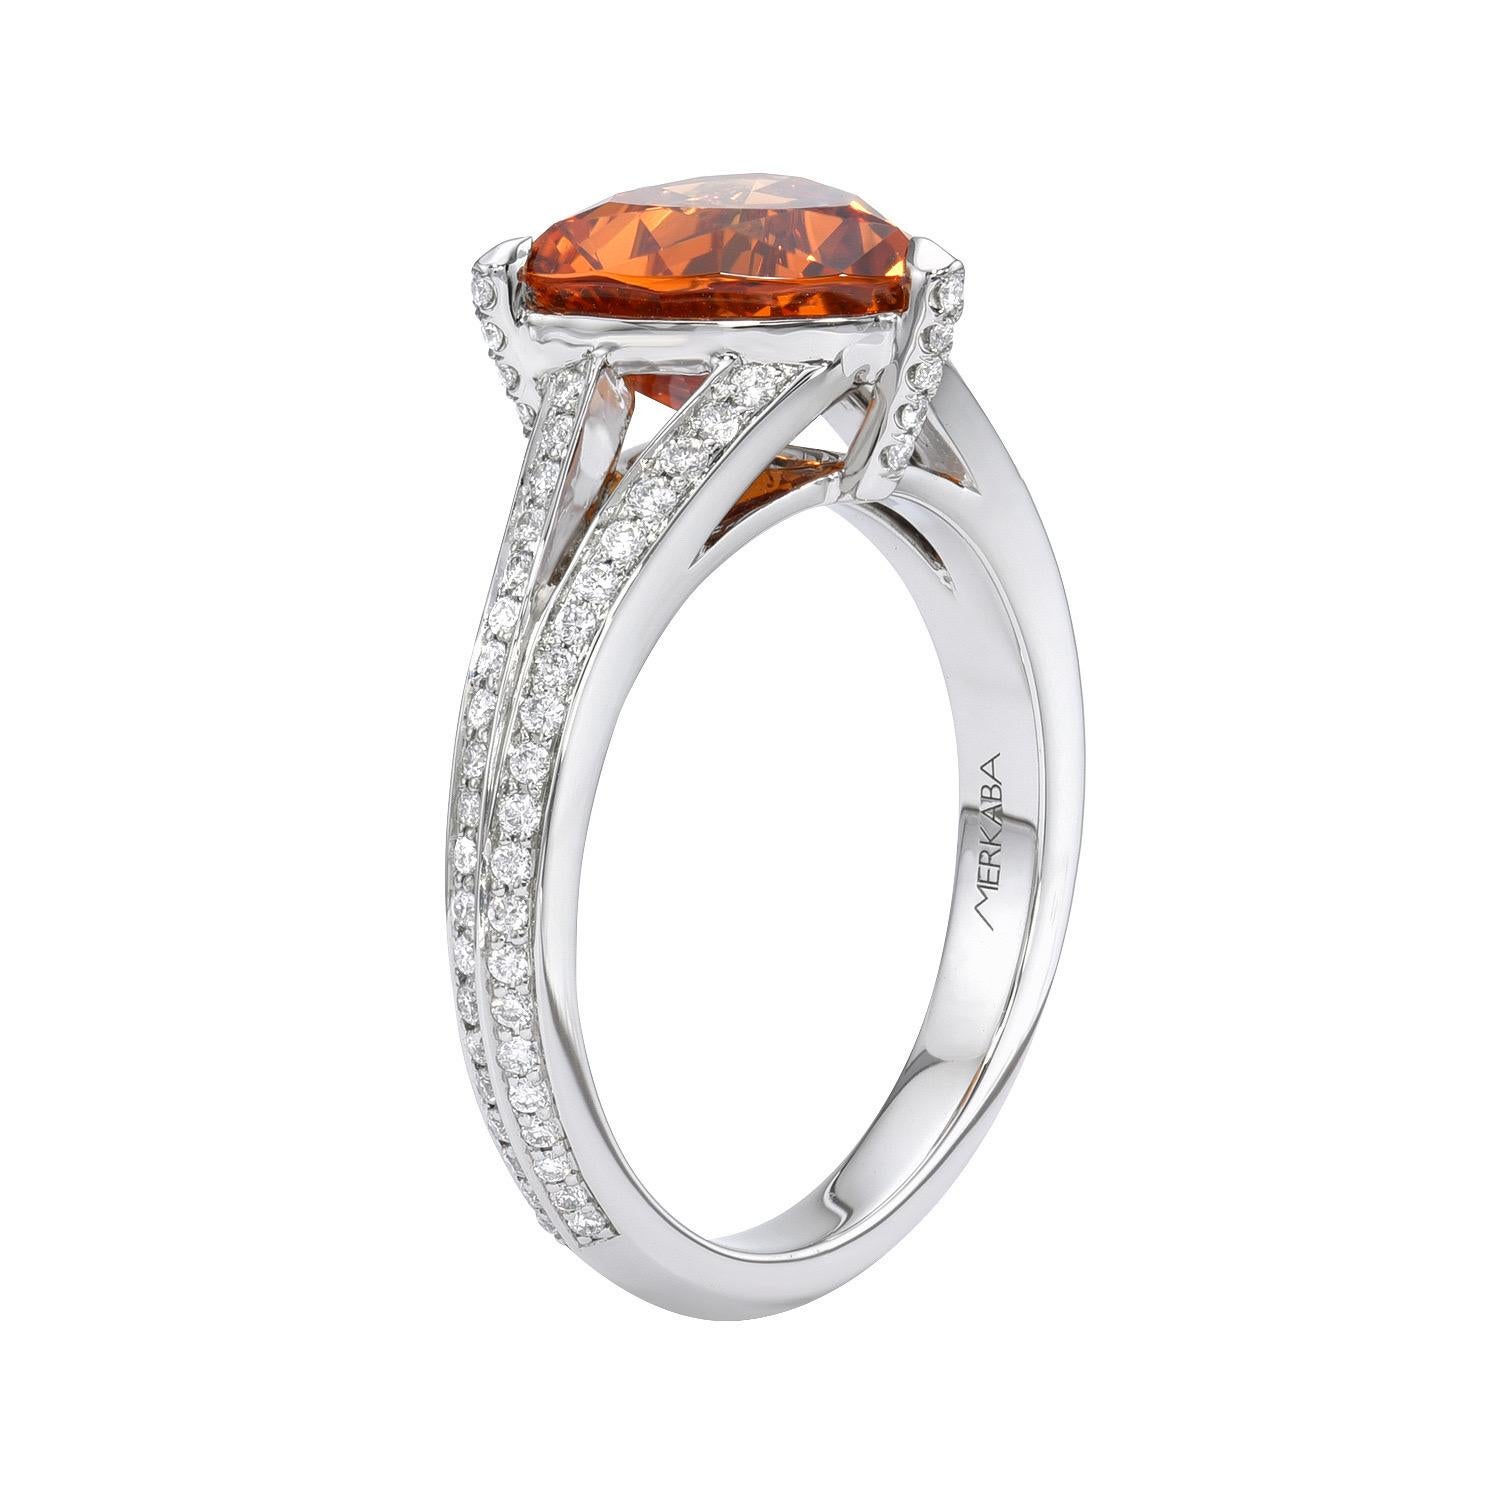 Striking 3.76 carat Mandarin Garnet Trillion platinum ring, decorated with a total of 0.32 carat round brilliant diamonds.
Ring size 6.5. Resizing is complementary upon request.
Returns are accepted and paid by us within 7 days of delivery.

Please